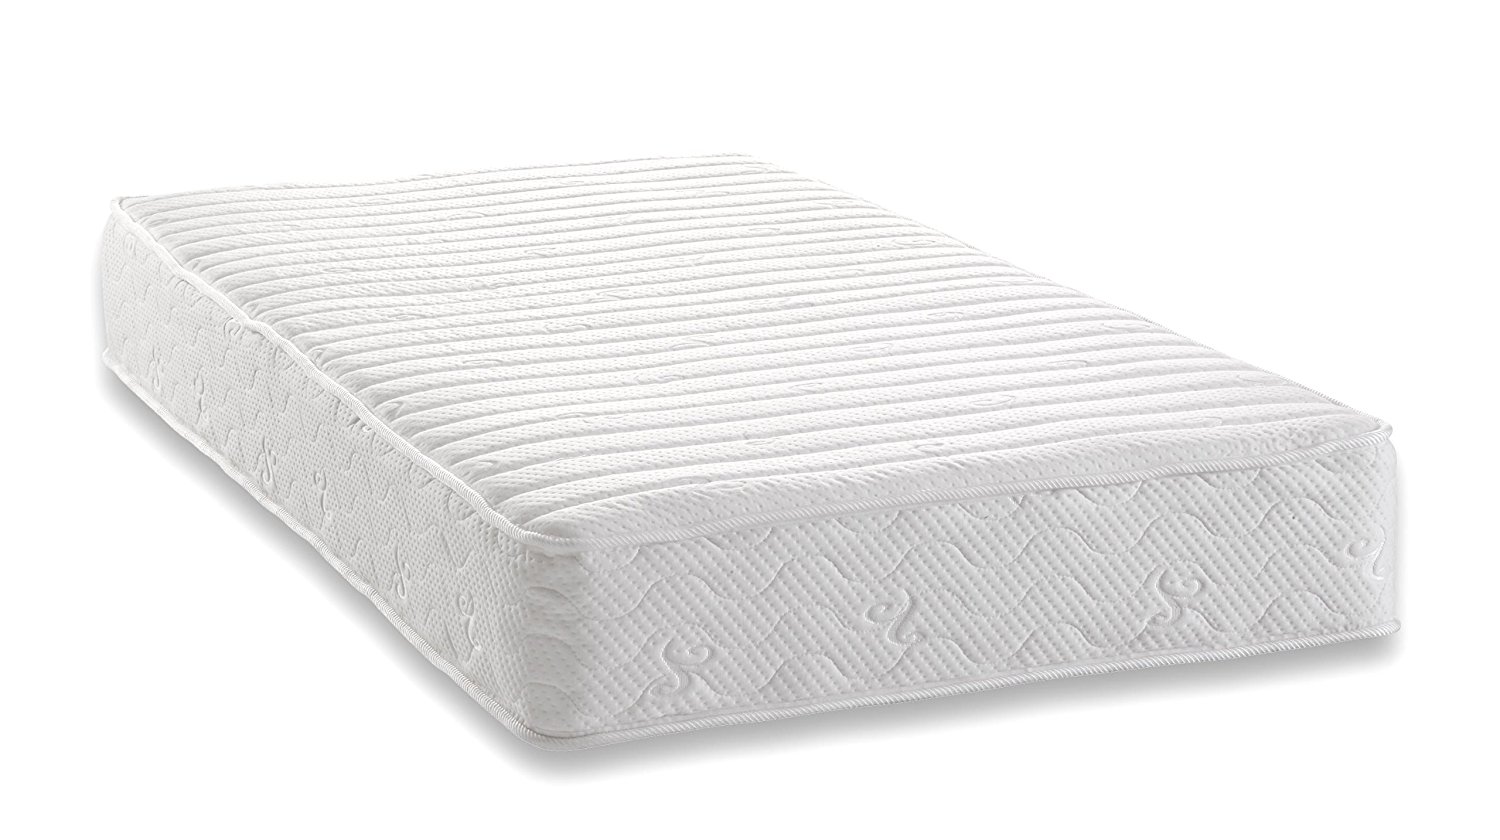 Signature Sleep Contour 8 Inch Independently Encased Coil Mattress with Low VOC CertiPUR-US Certified Foam, 8 Inch Twin Coil Mattress - Available in Multiple Sizes